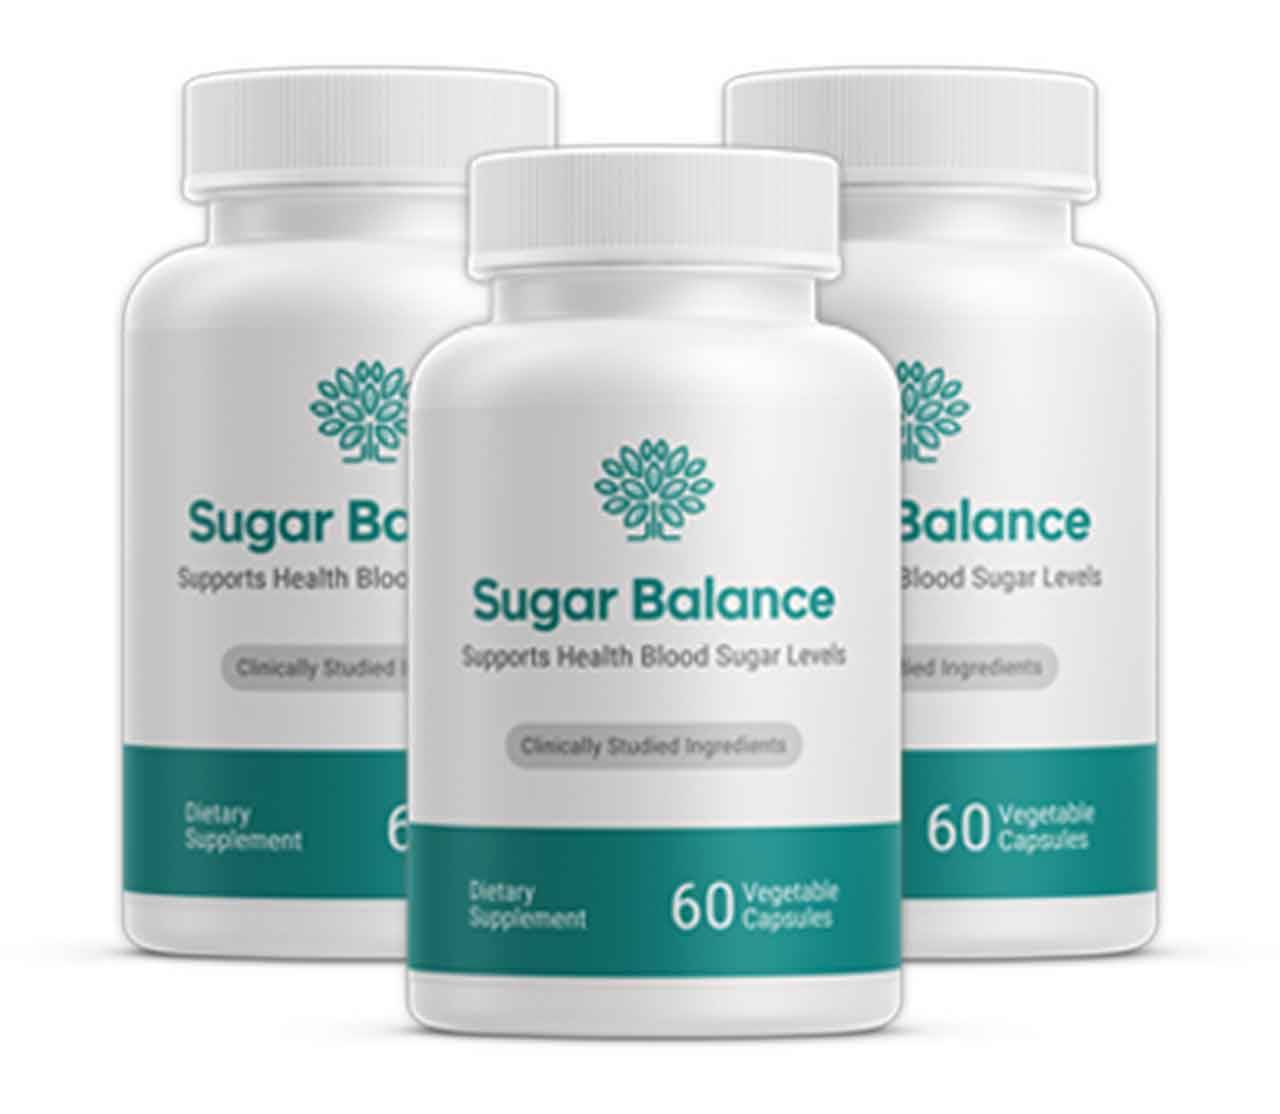 Sugar Balance Reviews: Safe Plant Insulin Supplement or Scam